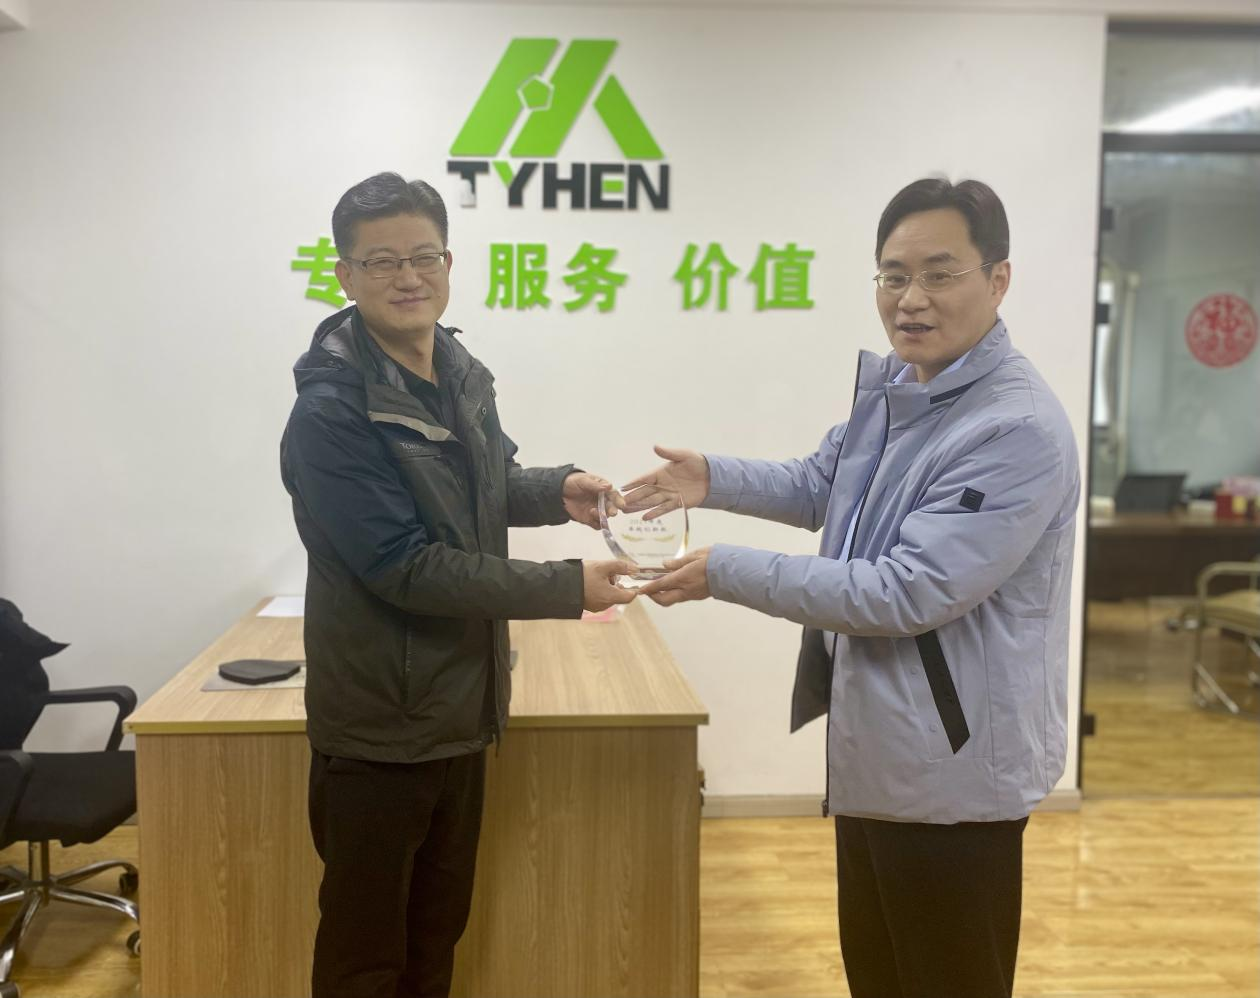 Leaders of Wuxi Huishan High-tech Entrepreneurship Service Center visited TYHEN